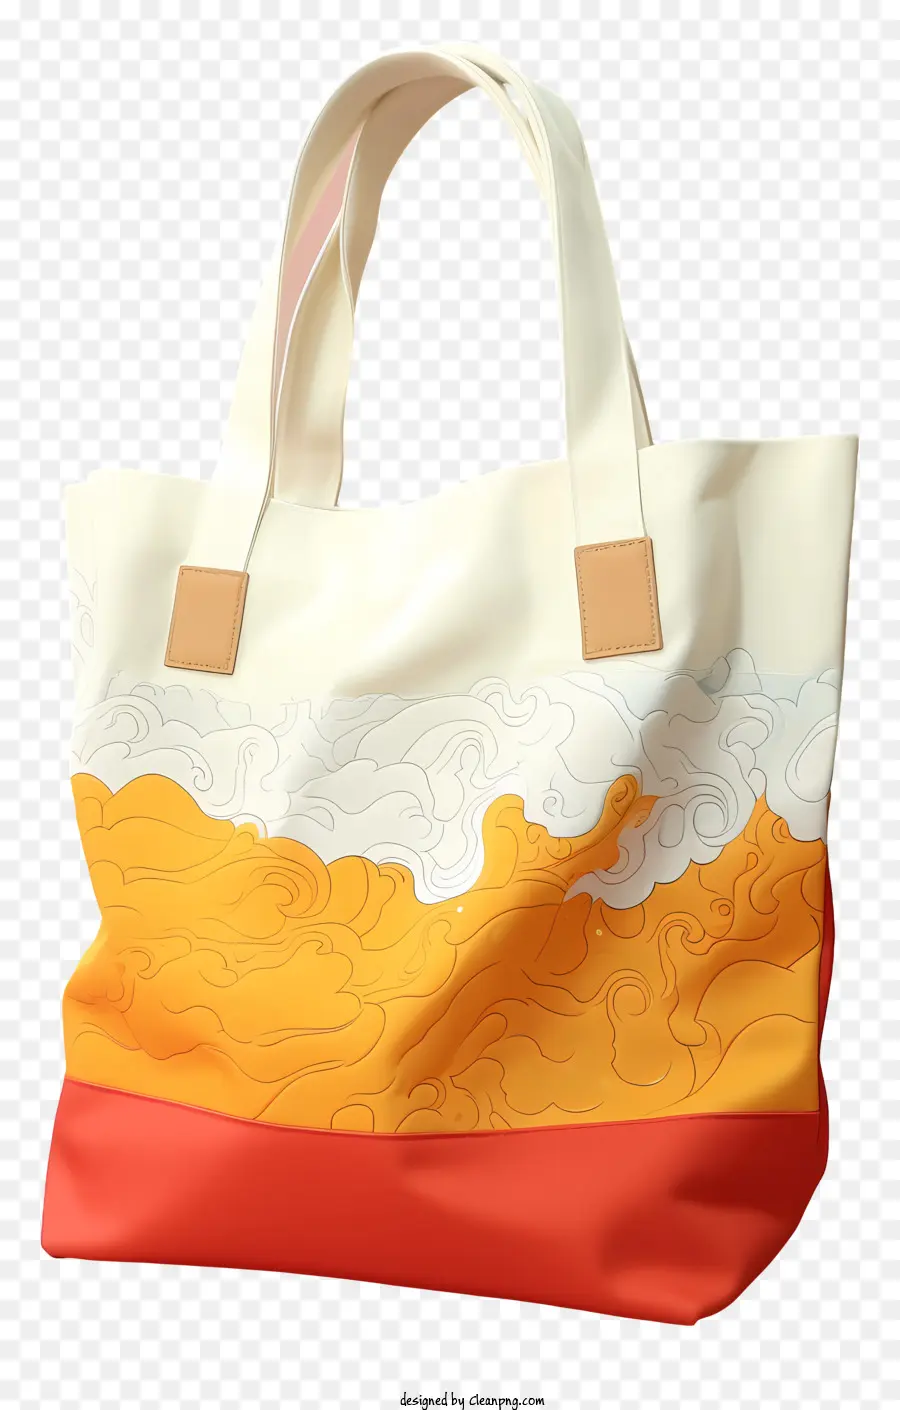 eco fabric cloth tote bag large tote bag sunset or sunrise design durable material traveling bag